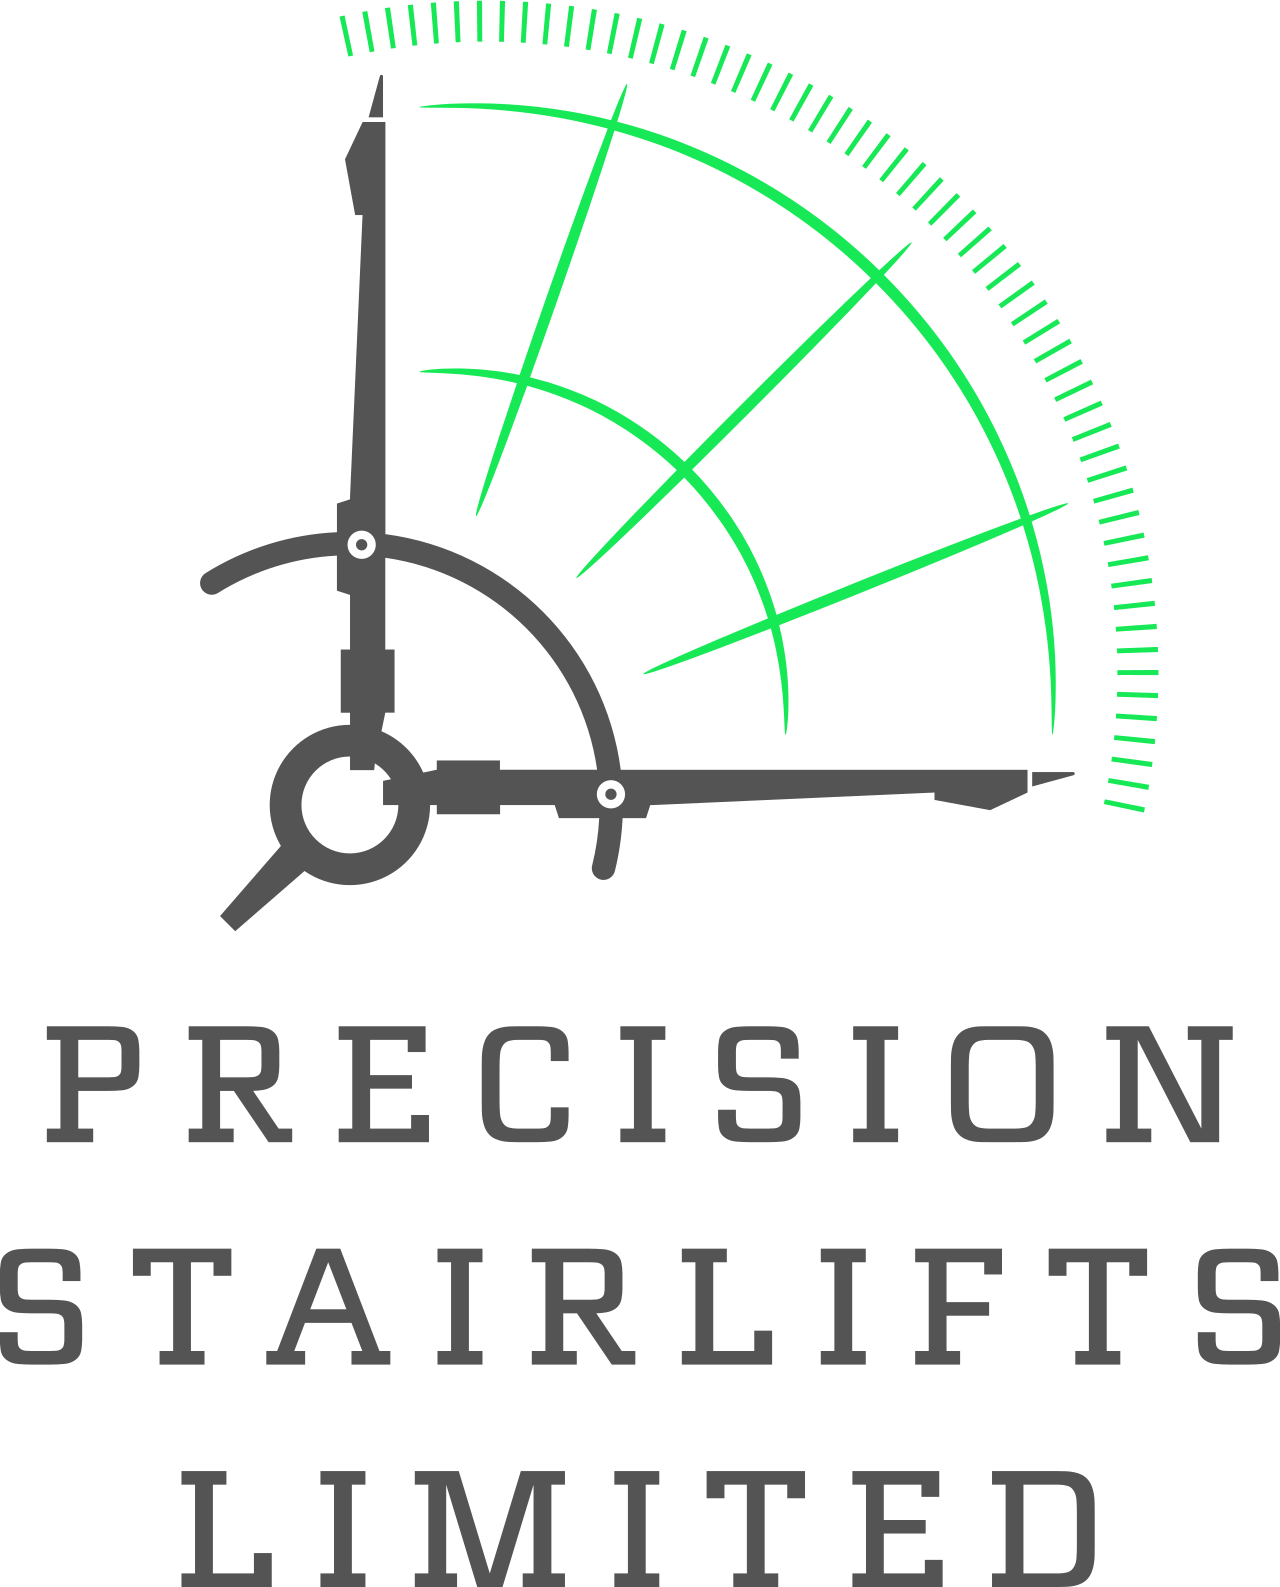 Precision
Stairlifts
limited's logo